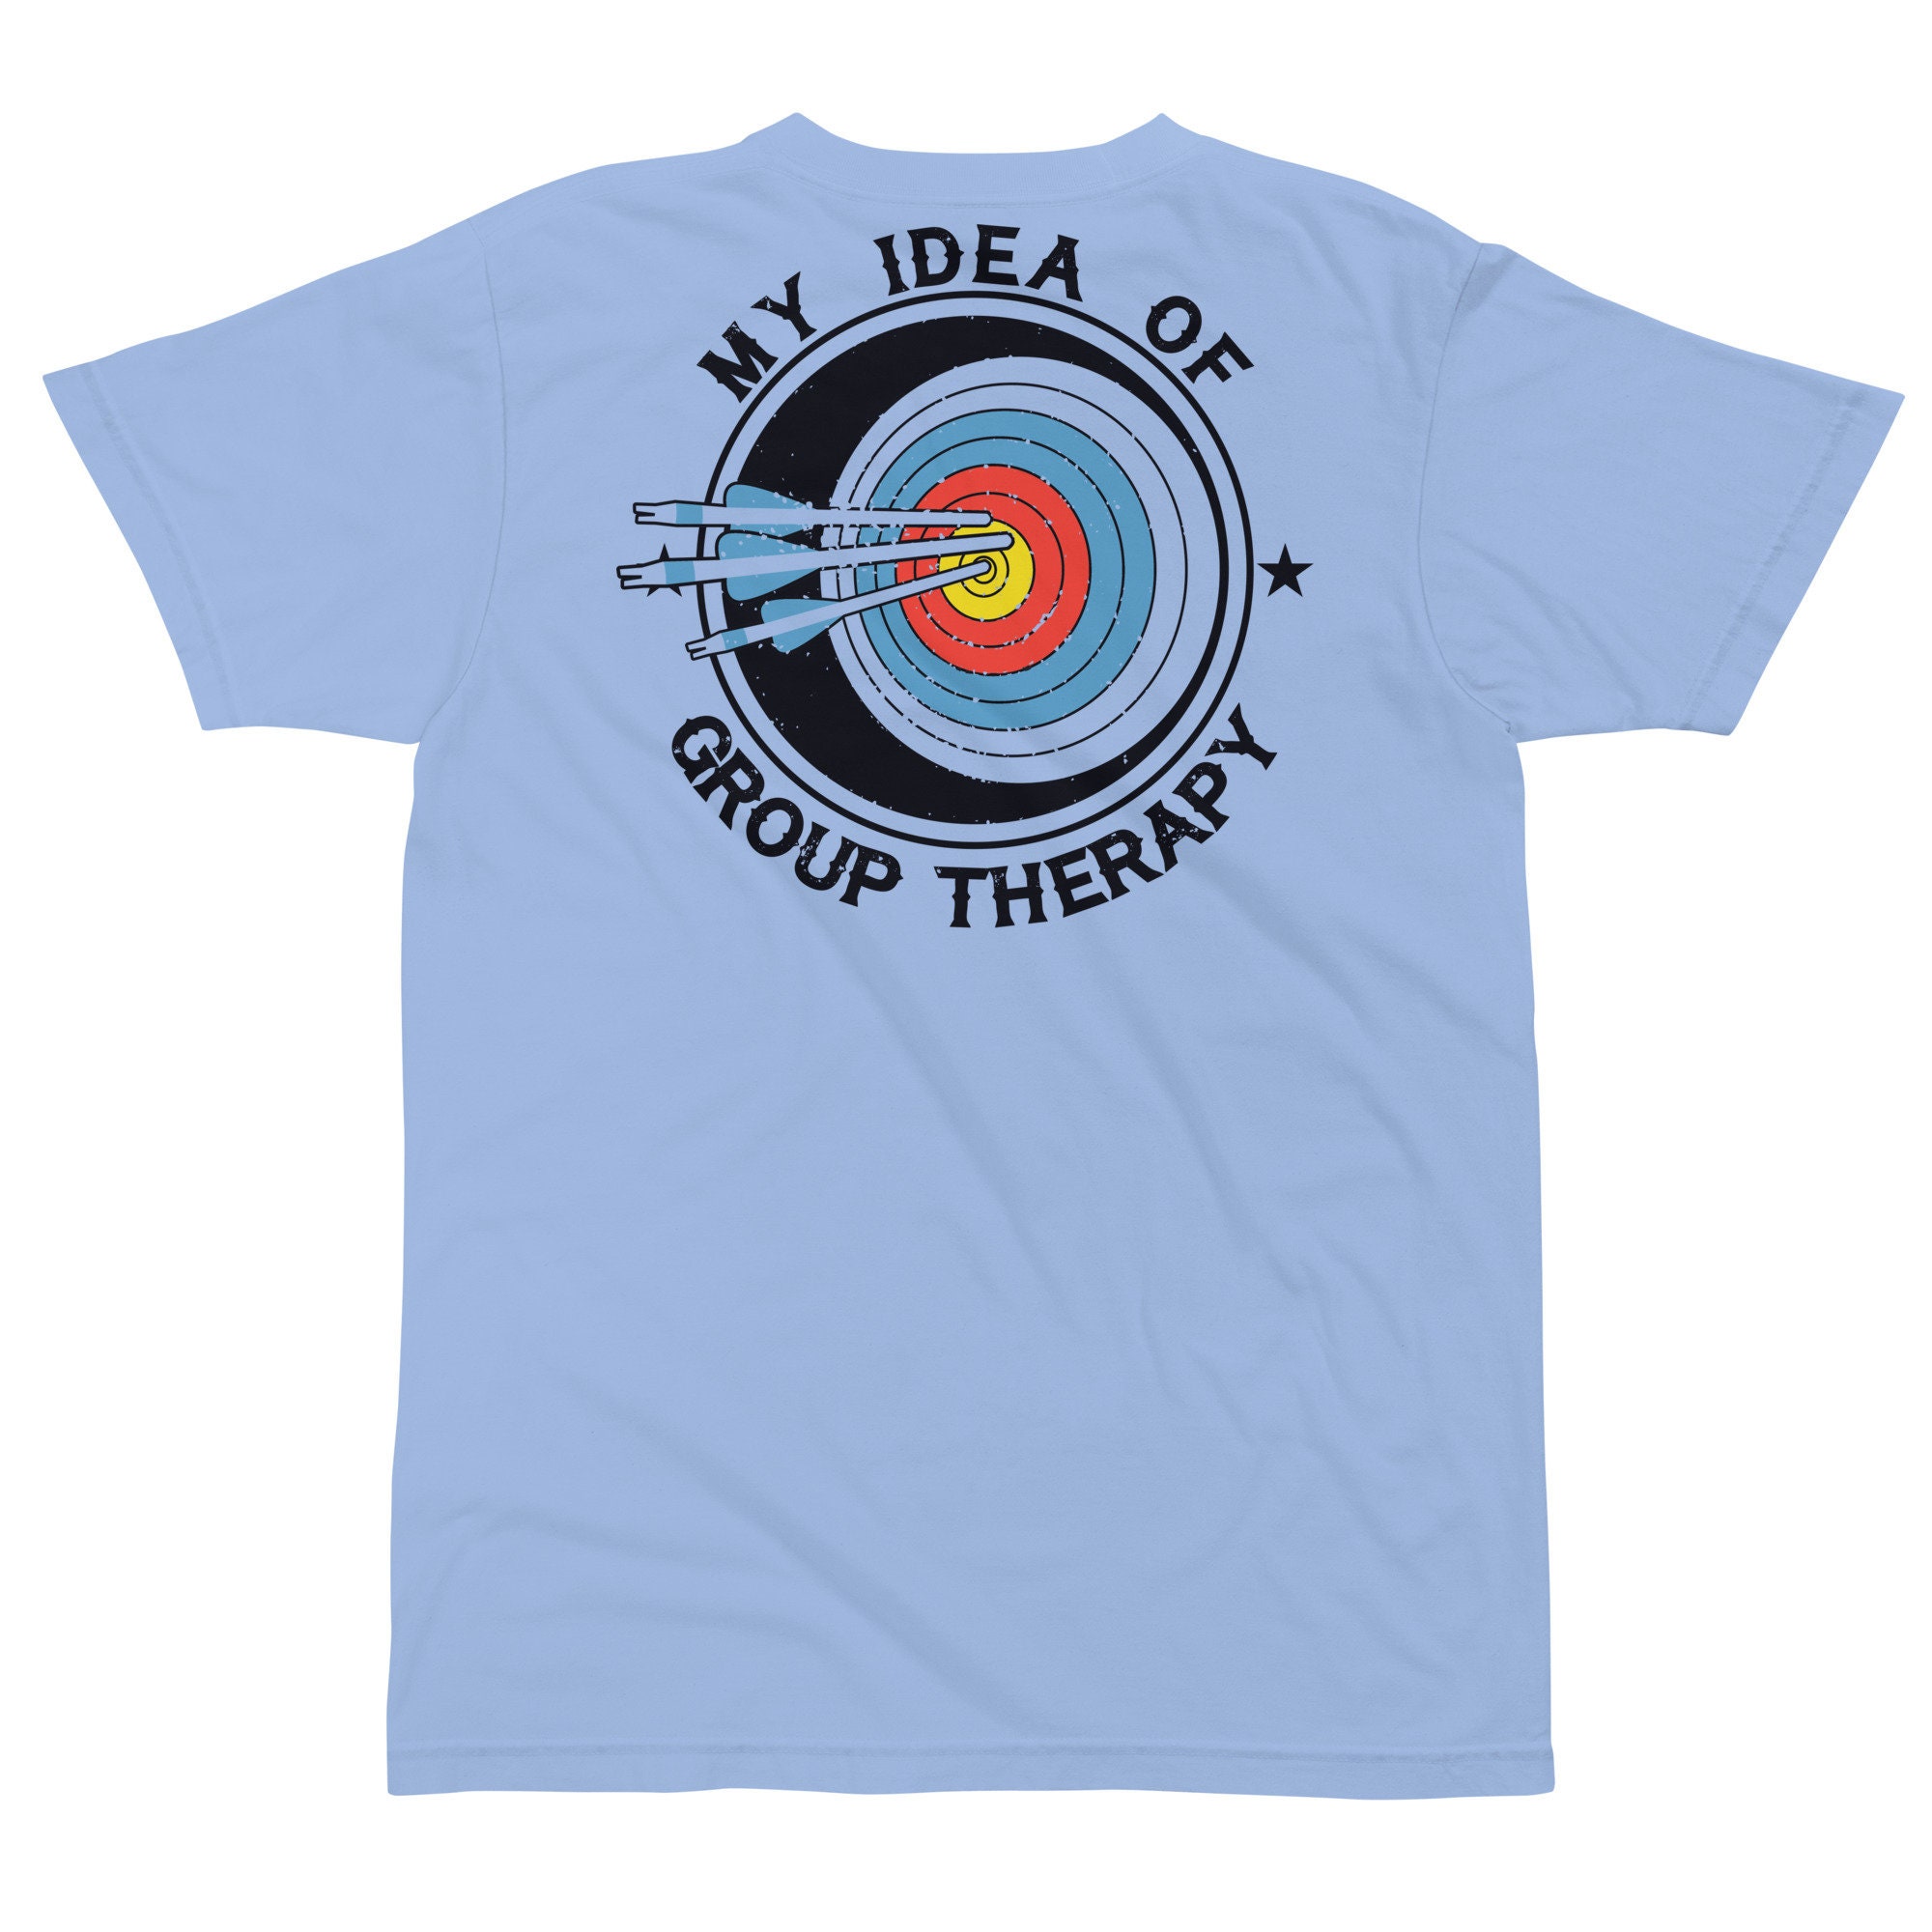 Discover Fun Gift Idea For Archers My Idea Of Group Therapy Archery T-Shirts